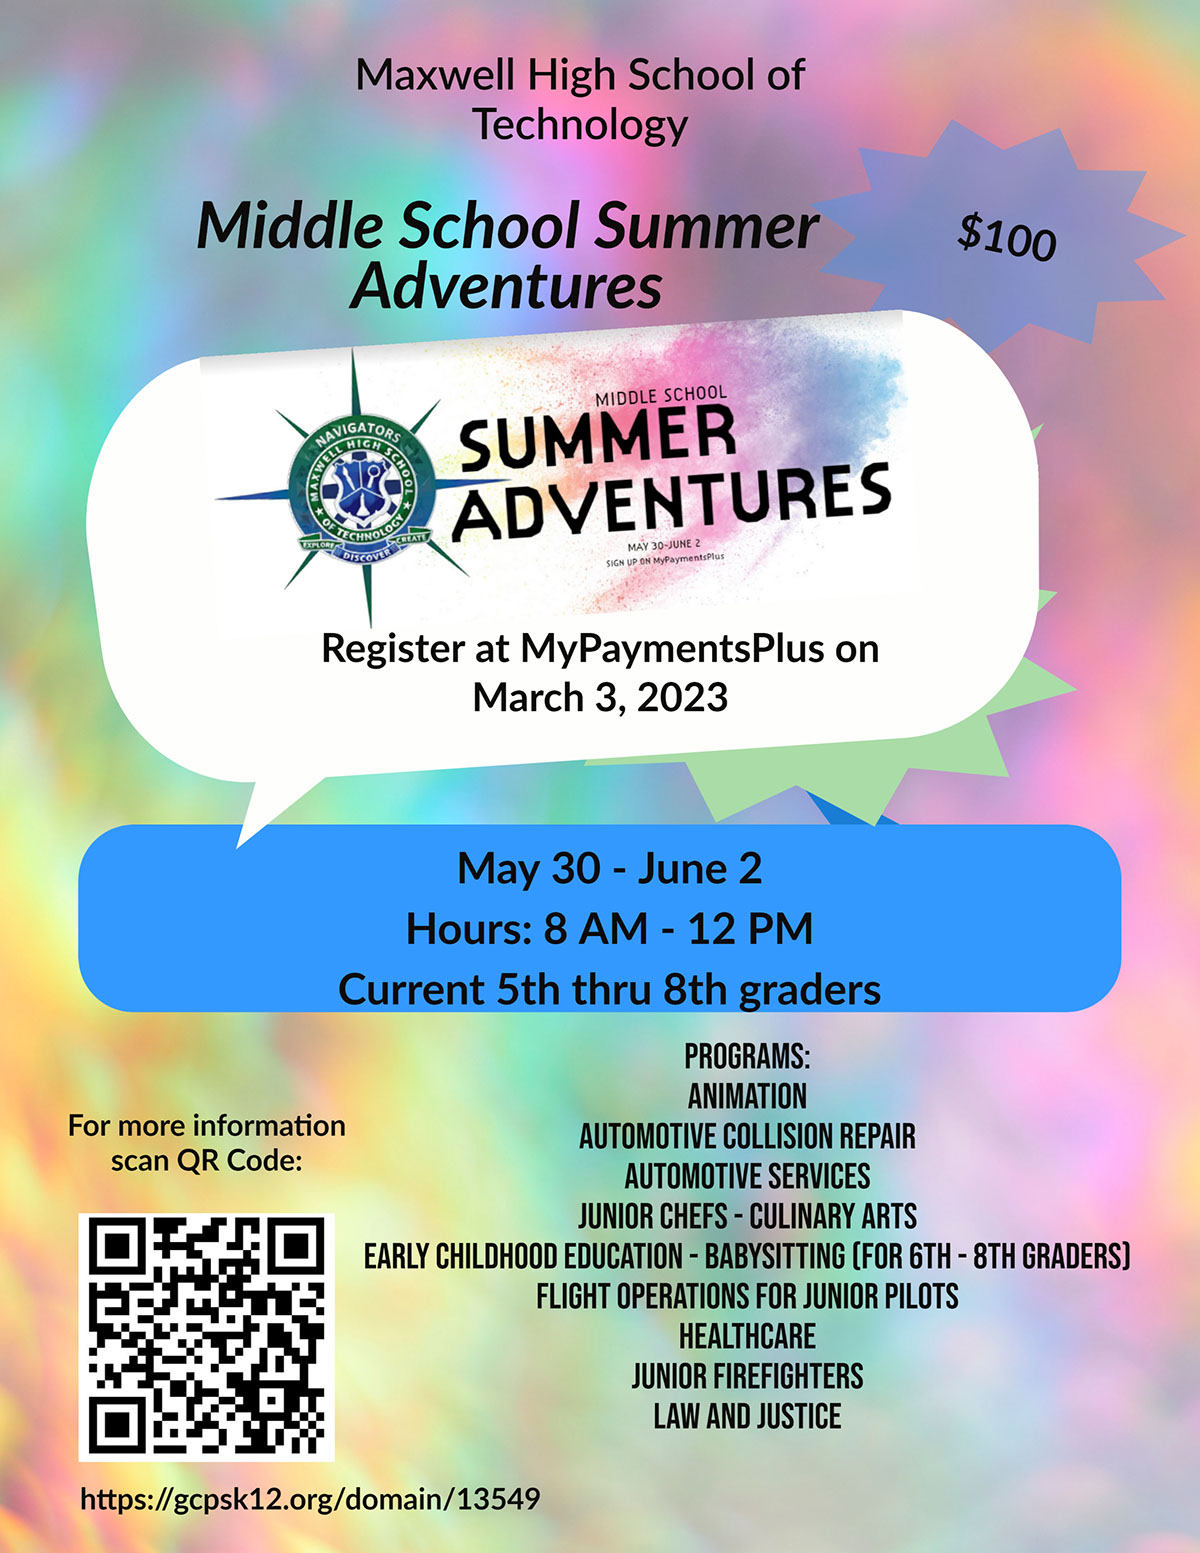 Middle School Summer Adventures Middle School Summer Adventures $100 Maxwell High School of Technology May 30 - June 2 Hours: 8 AM - 12 PM Current 5th thru 8th graders Register at MyPaymentsPlus on March 3, 2023 https://gcpsk12.org/domain/13549 Programs: Animation Automotive Collision Repair Automotive Services Junior Chefs - Culinary Arts Early Childhood Education - Babysitting (for 6th - 8th graders) Flight Operations for Junior Pilots Healthcare Junior Firefighters Law and Justice For more information scan QR Code: